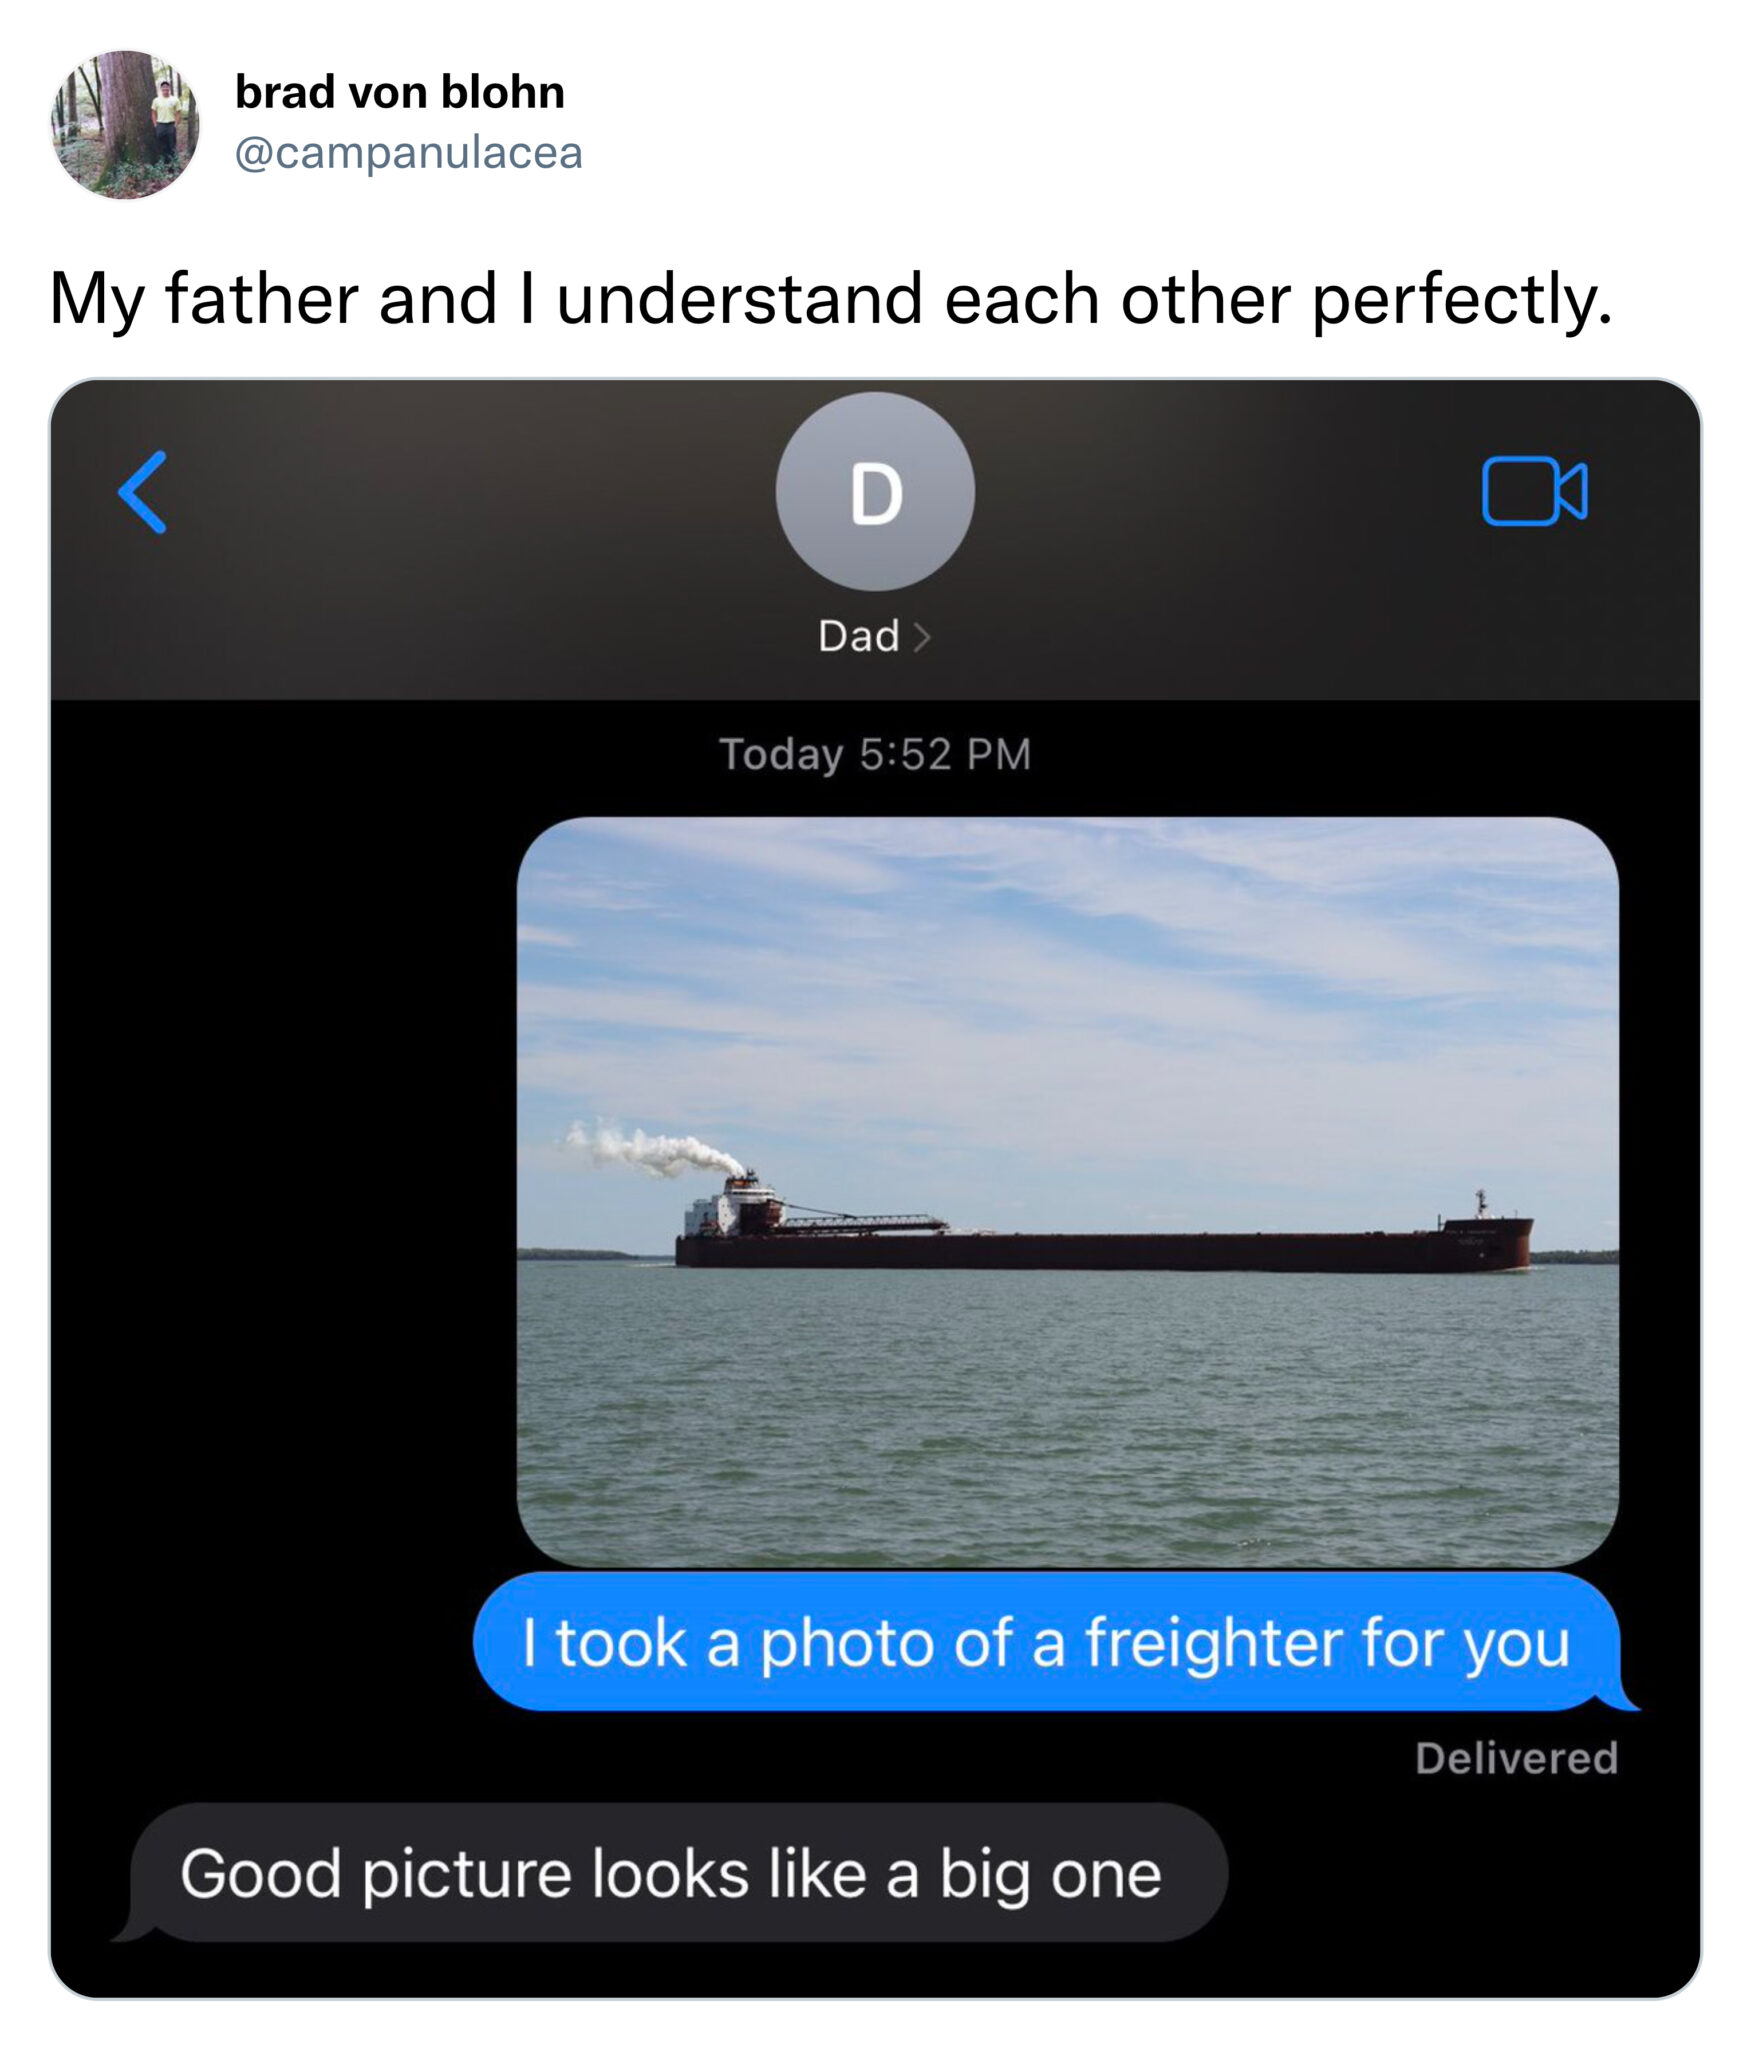 multimedia - brad von blohn My father and I understand each other perfectly. D 0 Dad > Today I took a photo of a freighter for you Delivered Good picture looks a big one